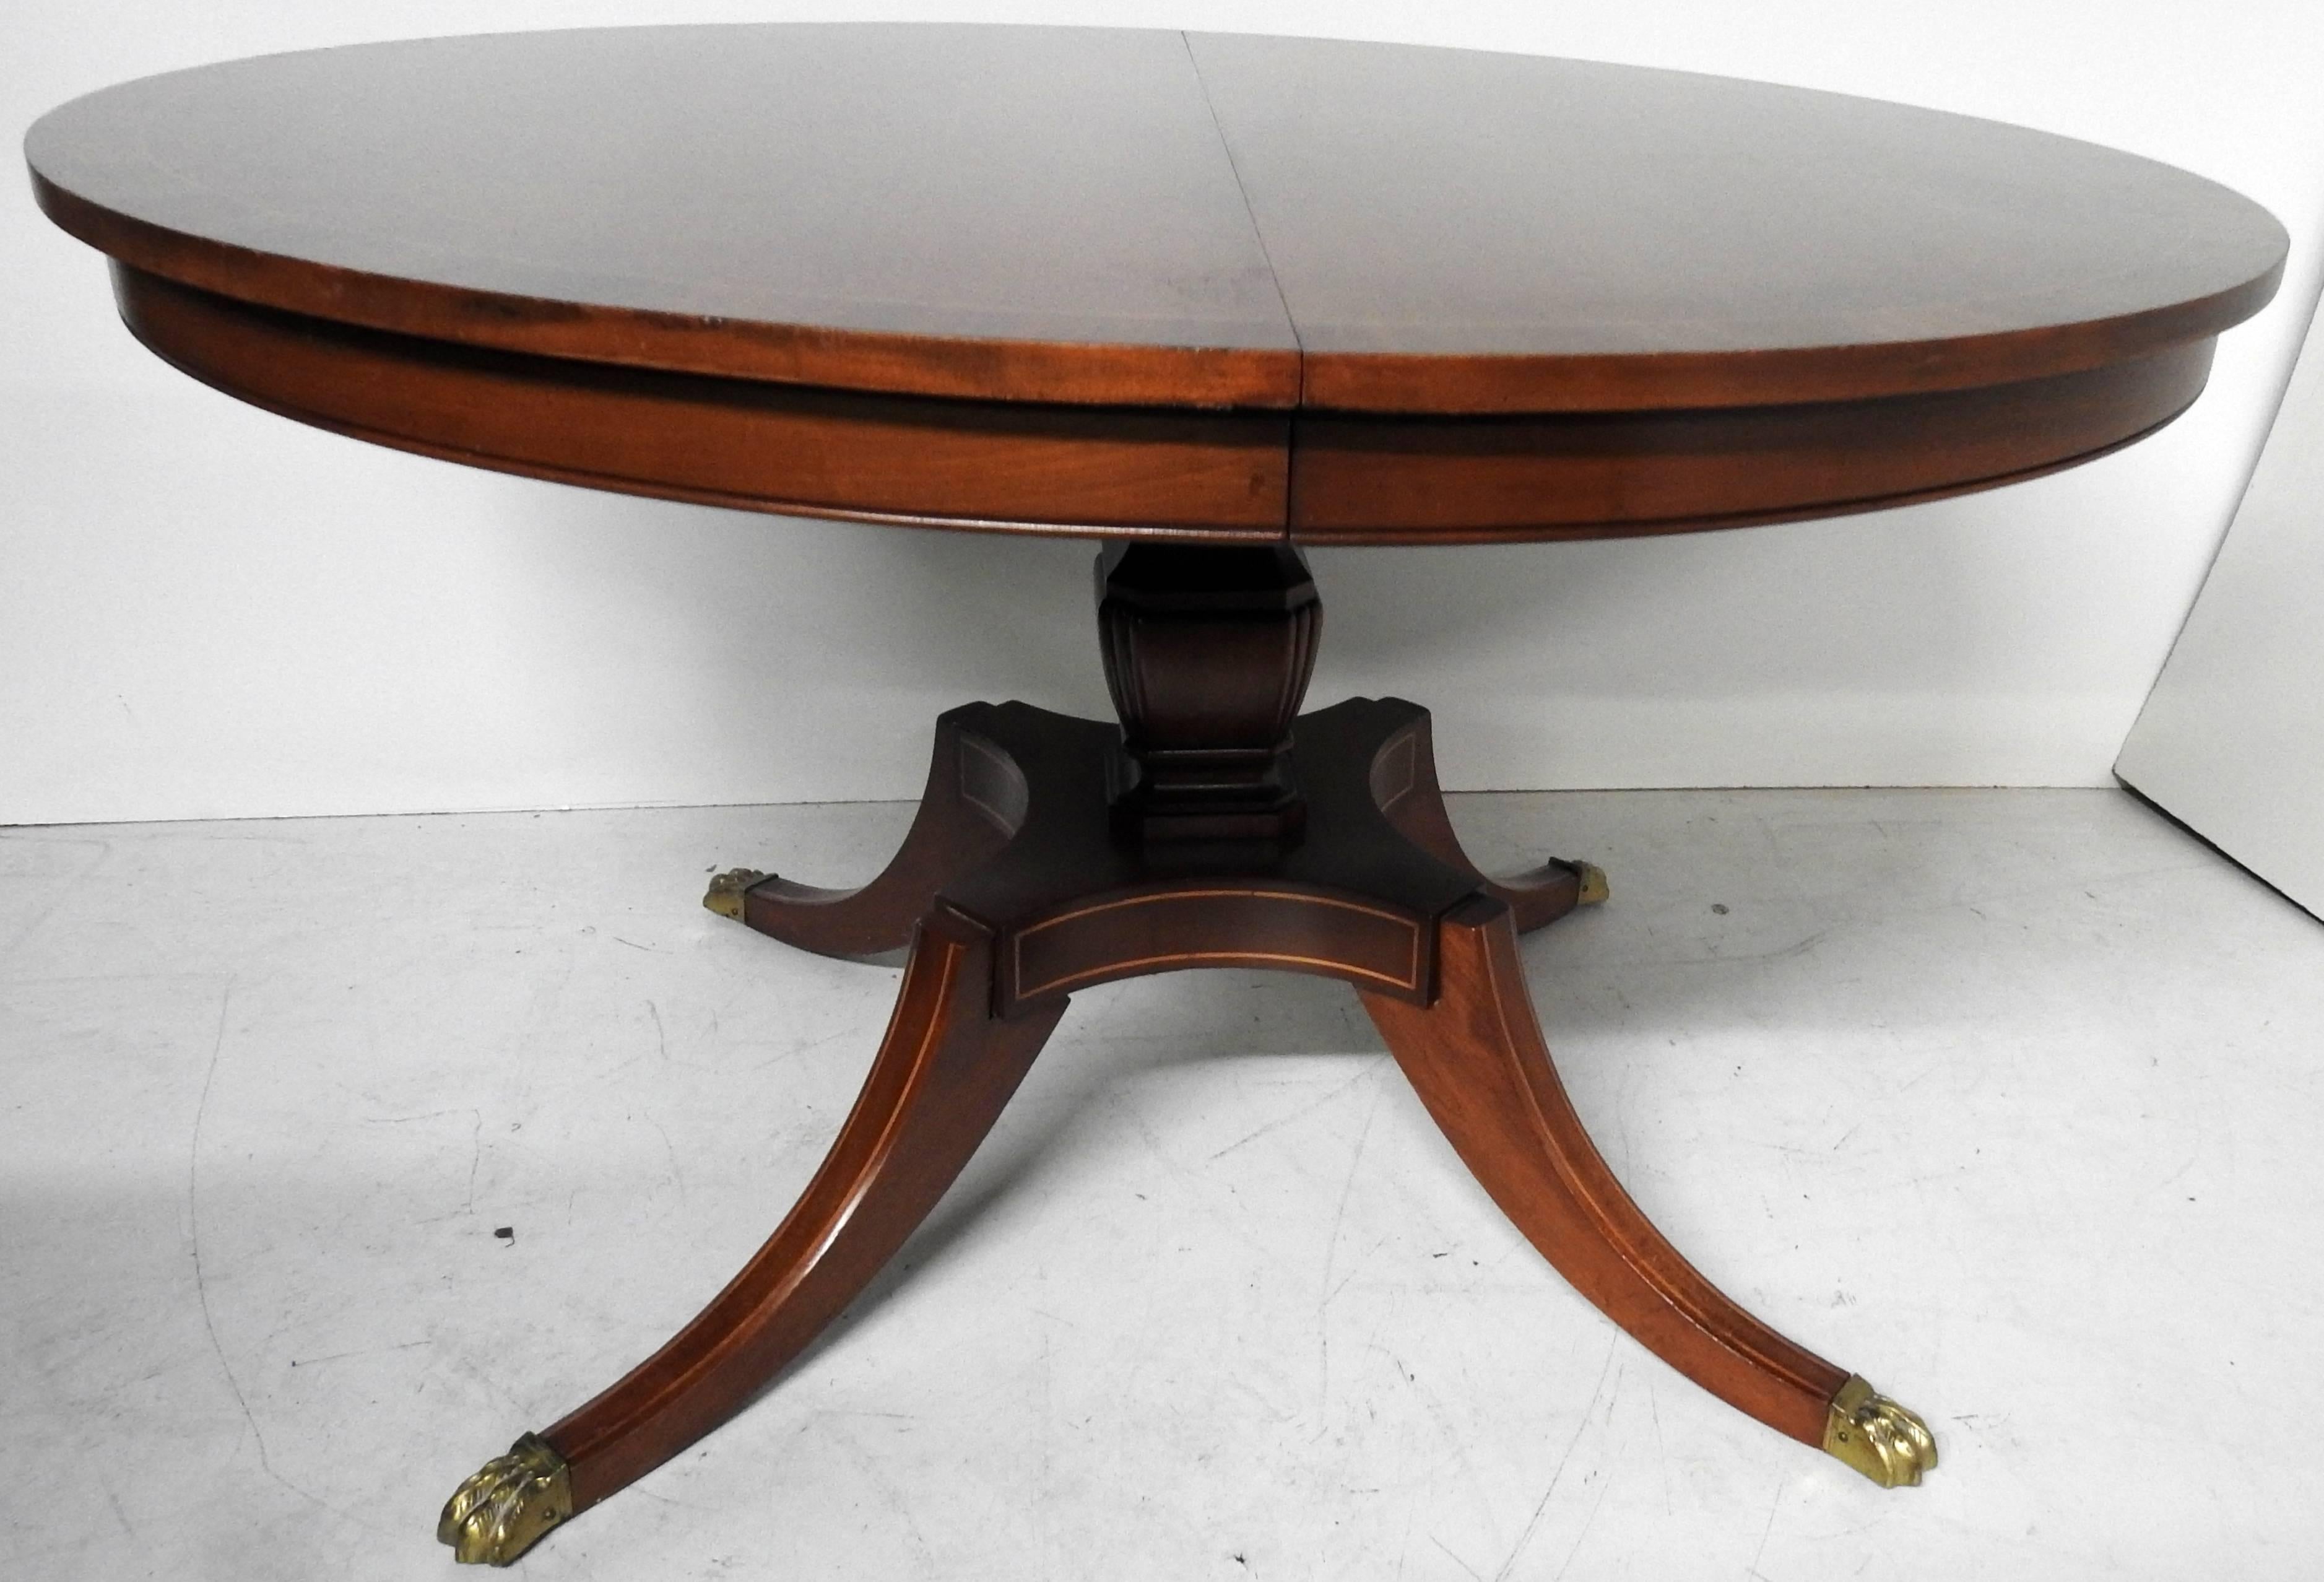 Custom quality Regency style mahogany round table with rosewood banding and pencil inlay and 1 18